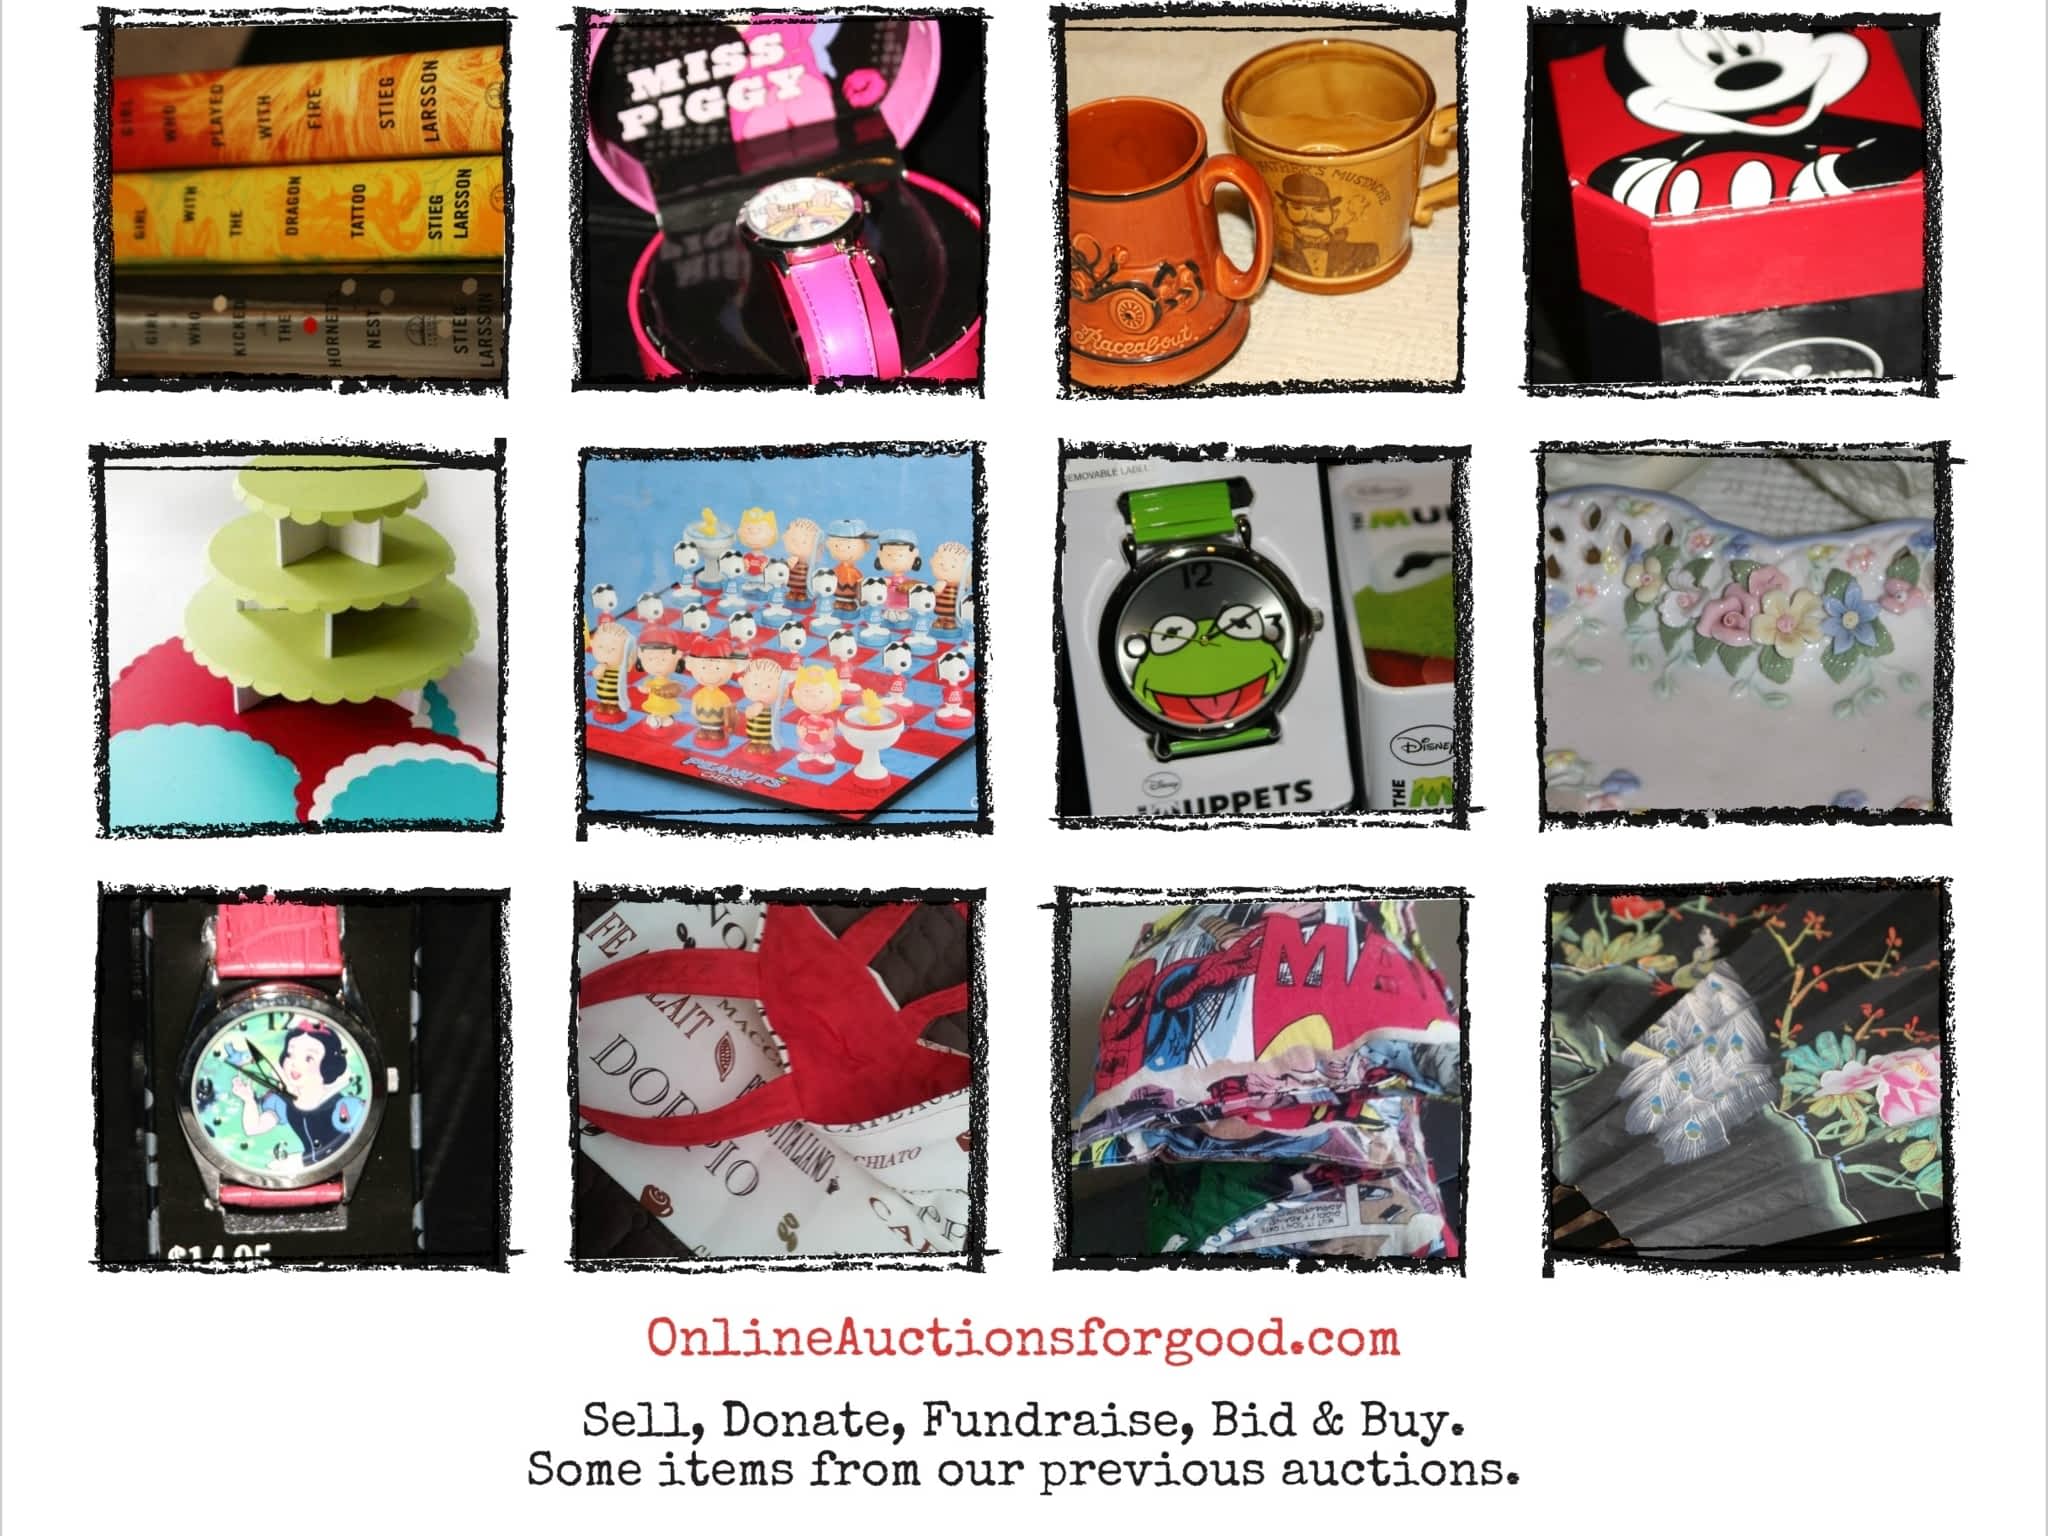 photo Online Auctions for Good